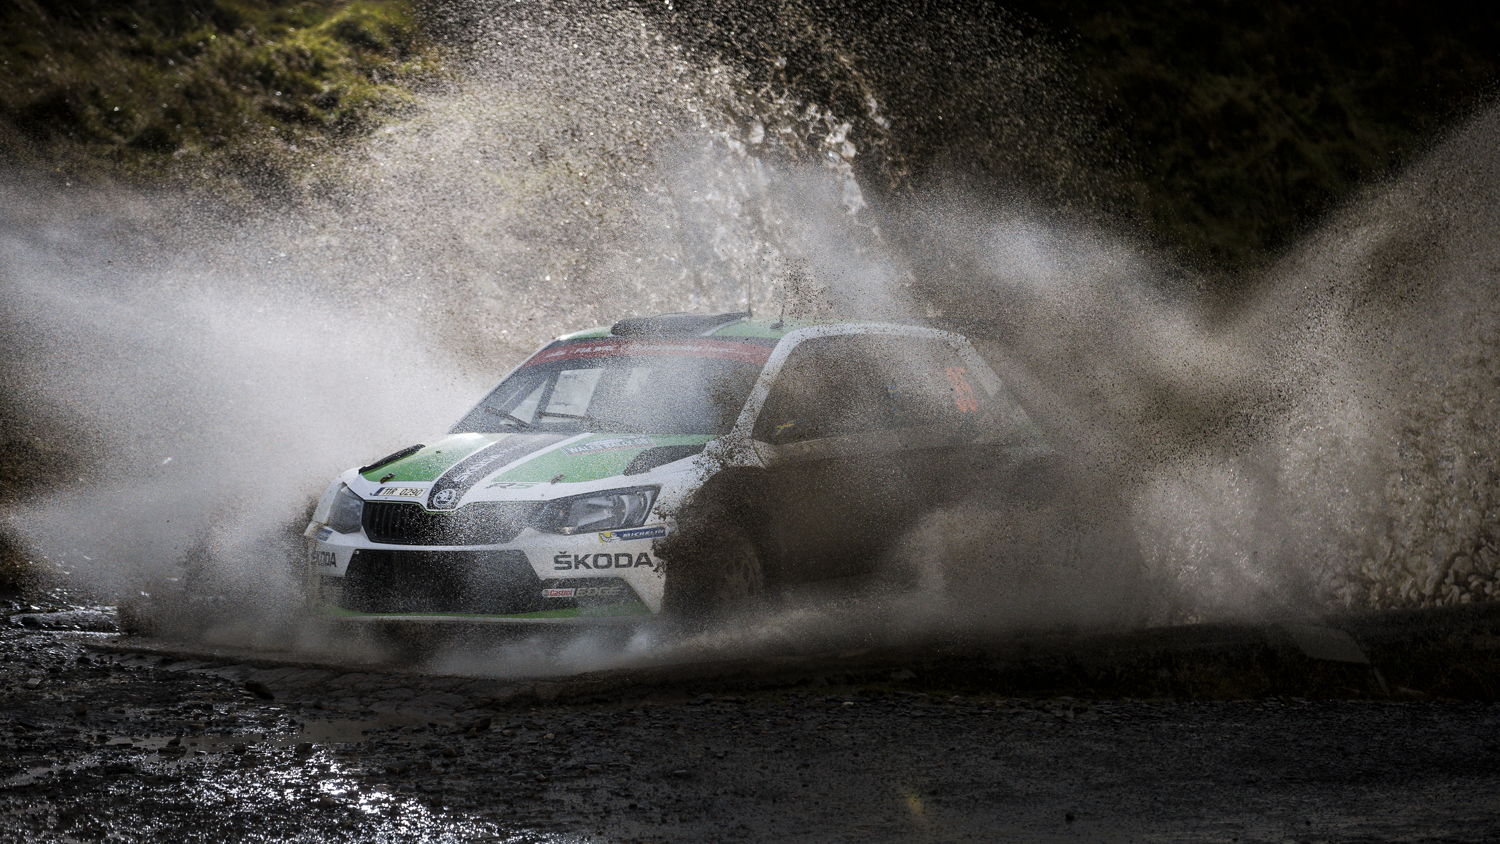 ŠKODA works driver Pontus Tidemand (S) and his co-driver Jonas Andersson (S) will also compete in the 2017 FIA World Rally Championship (WRC 2) in a ŠKODA FABIA R5.